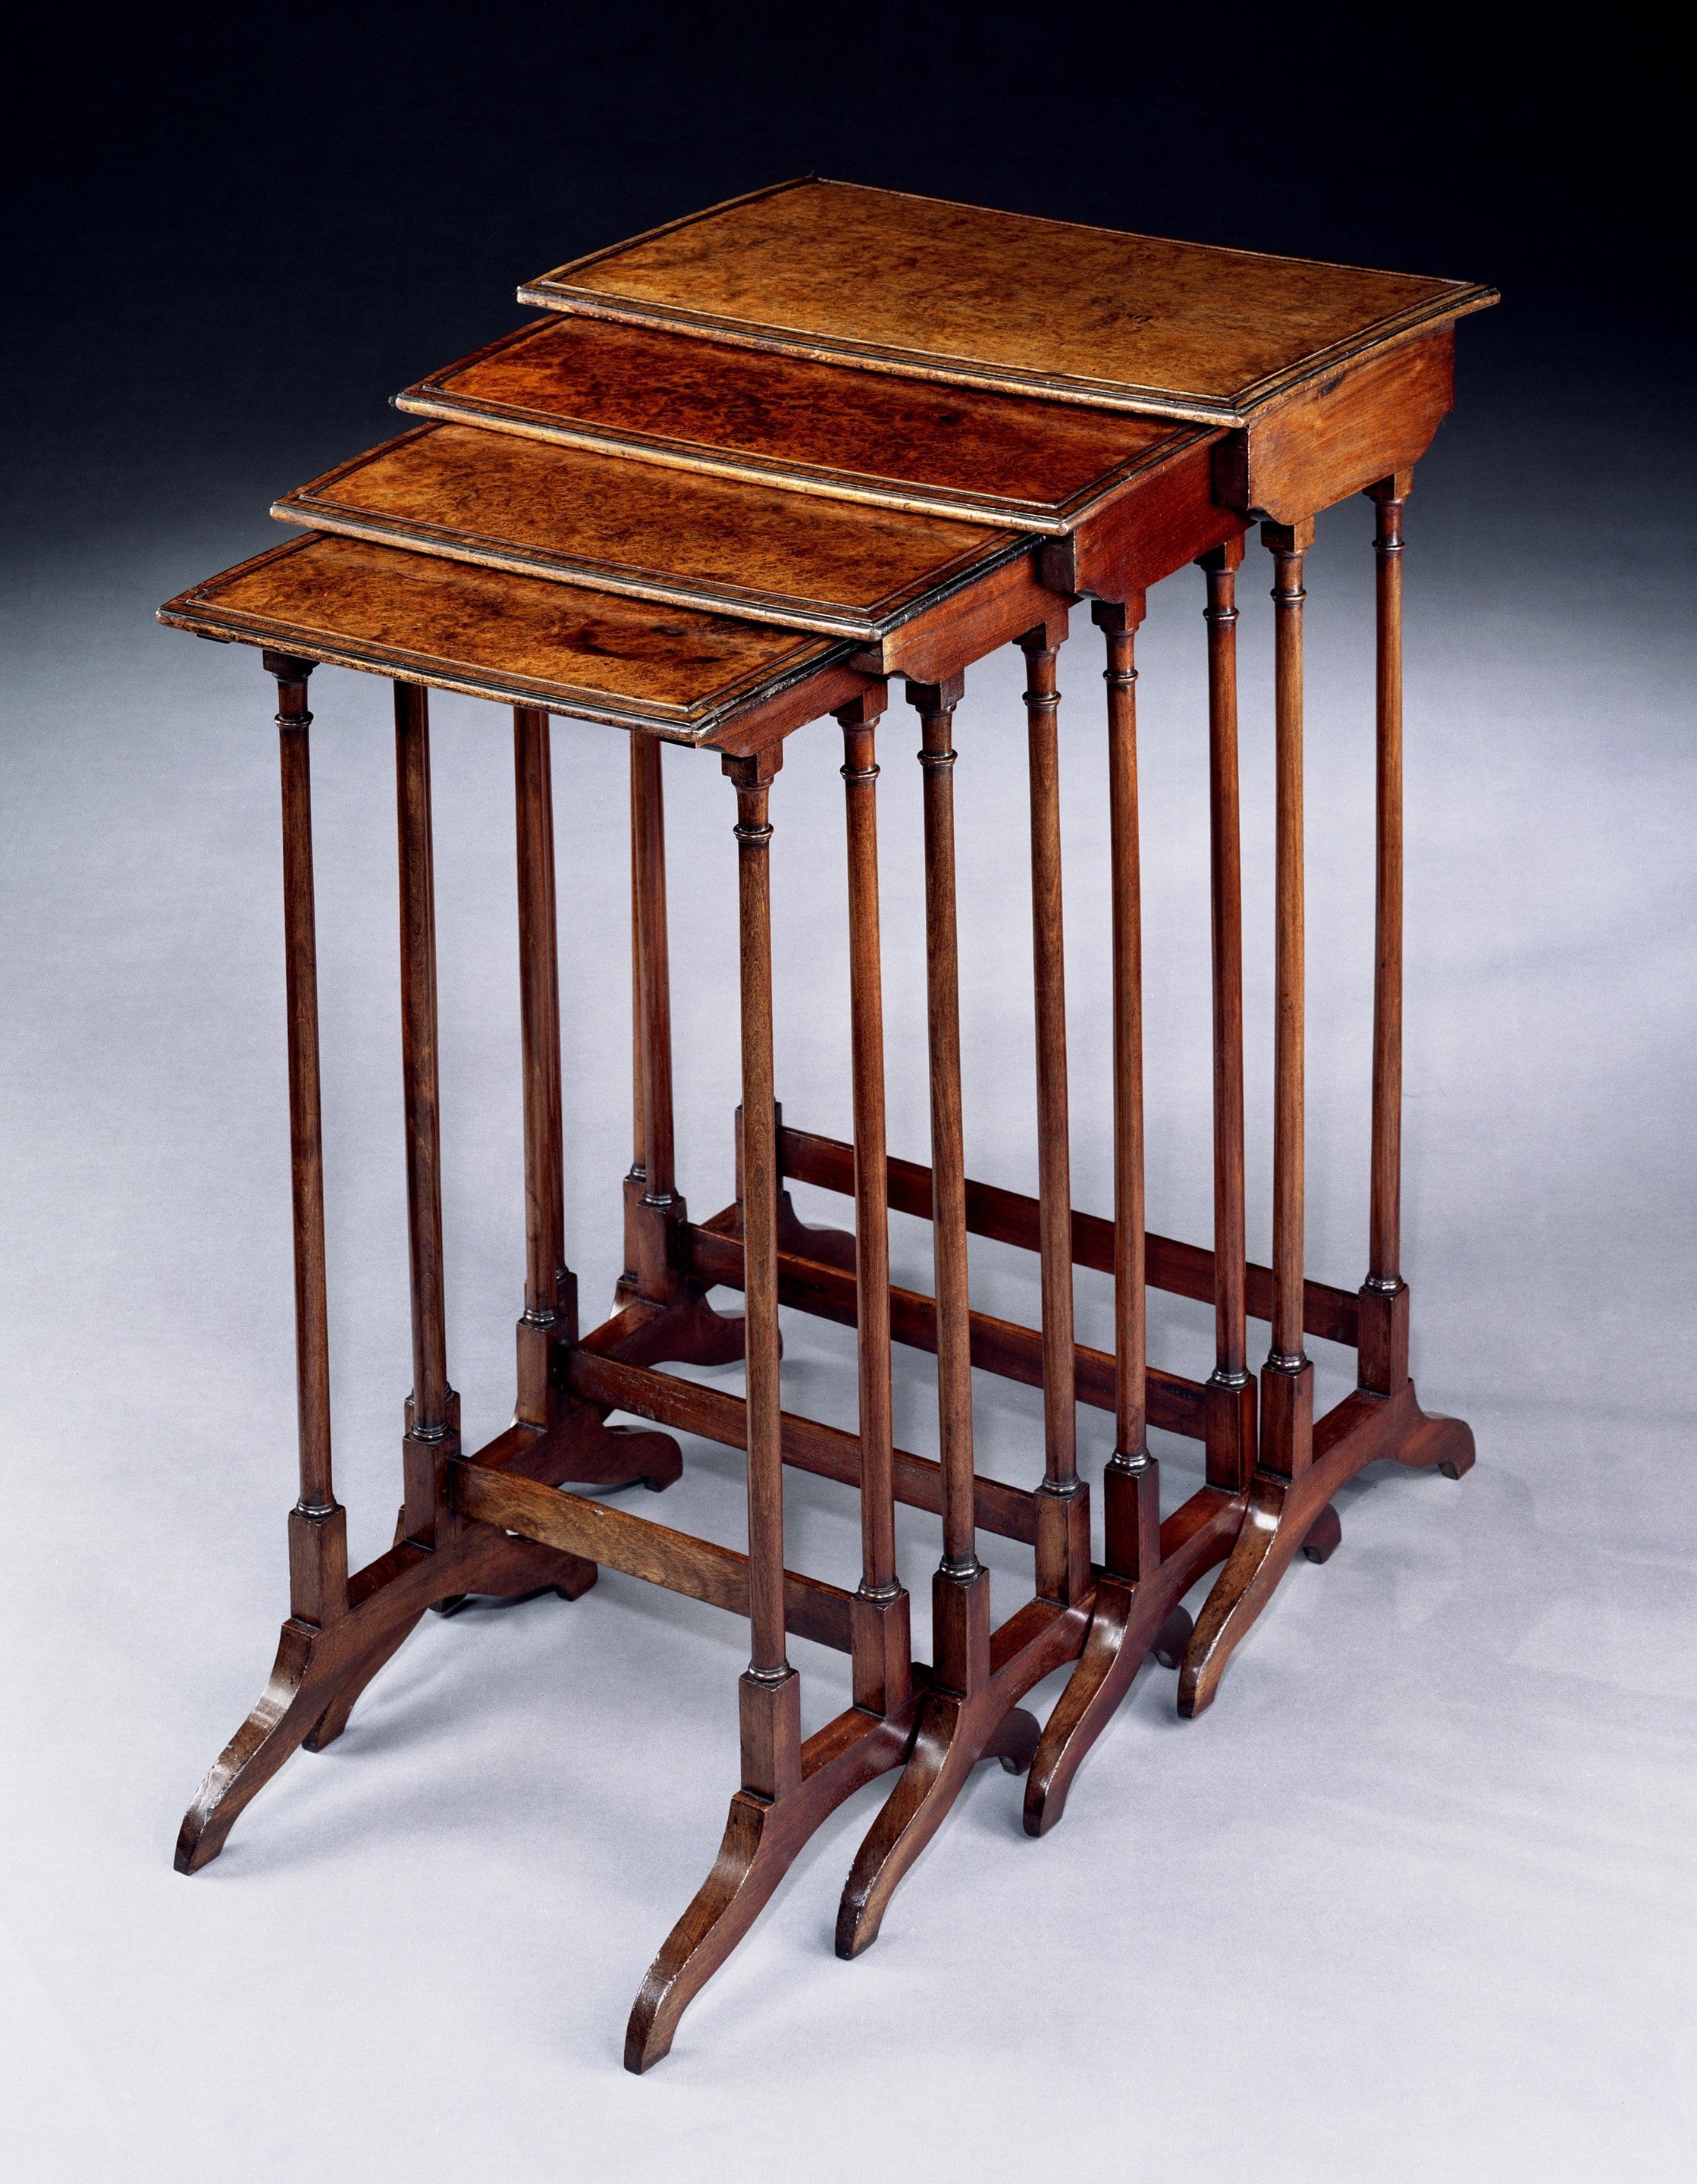 A Regency Nest of Amboyna Tables (4431501) For Sale